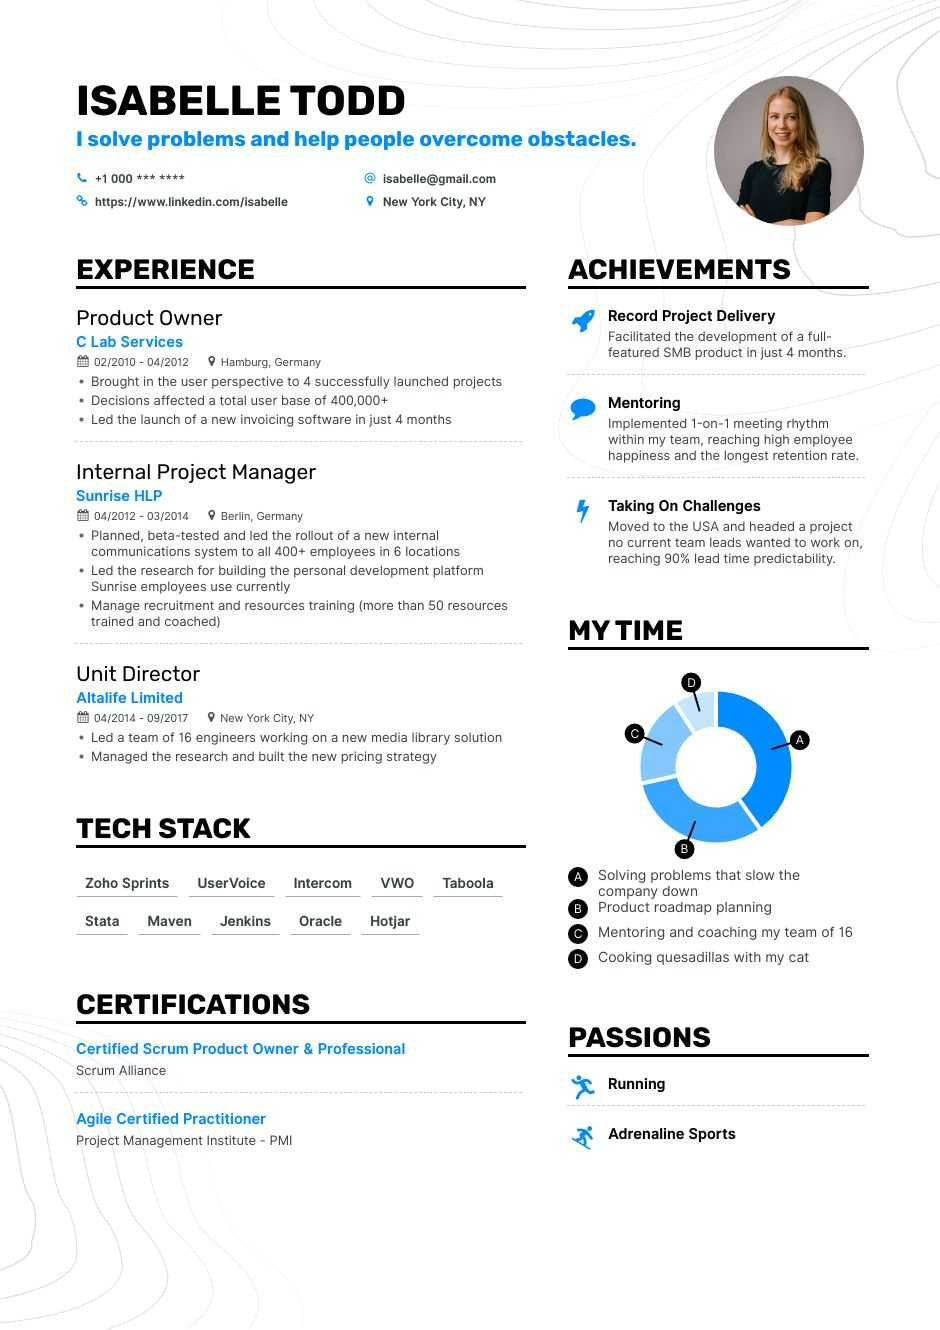 Sample Resume Of A Co Founder Ceo Resume: Tips and Tricks for Writing A Job-winning Resume